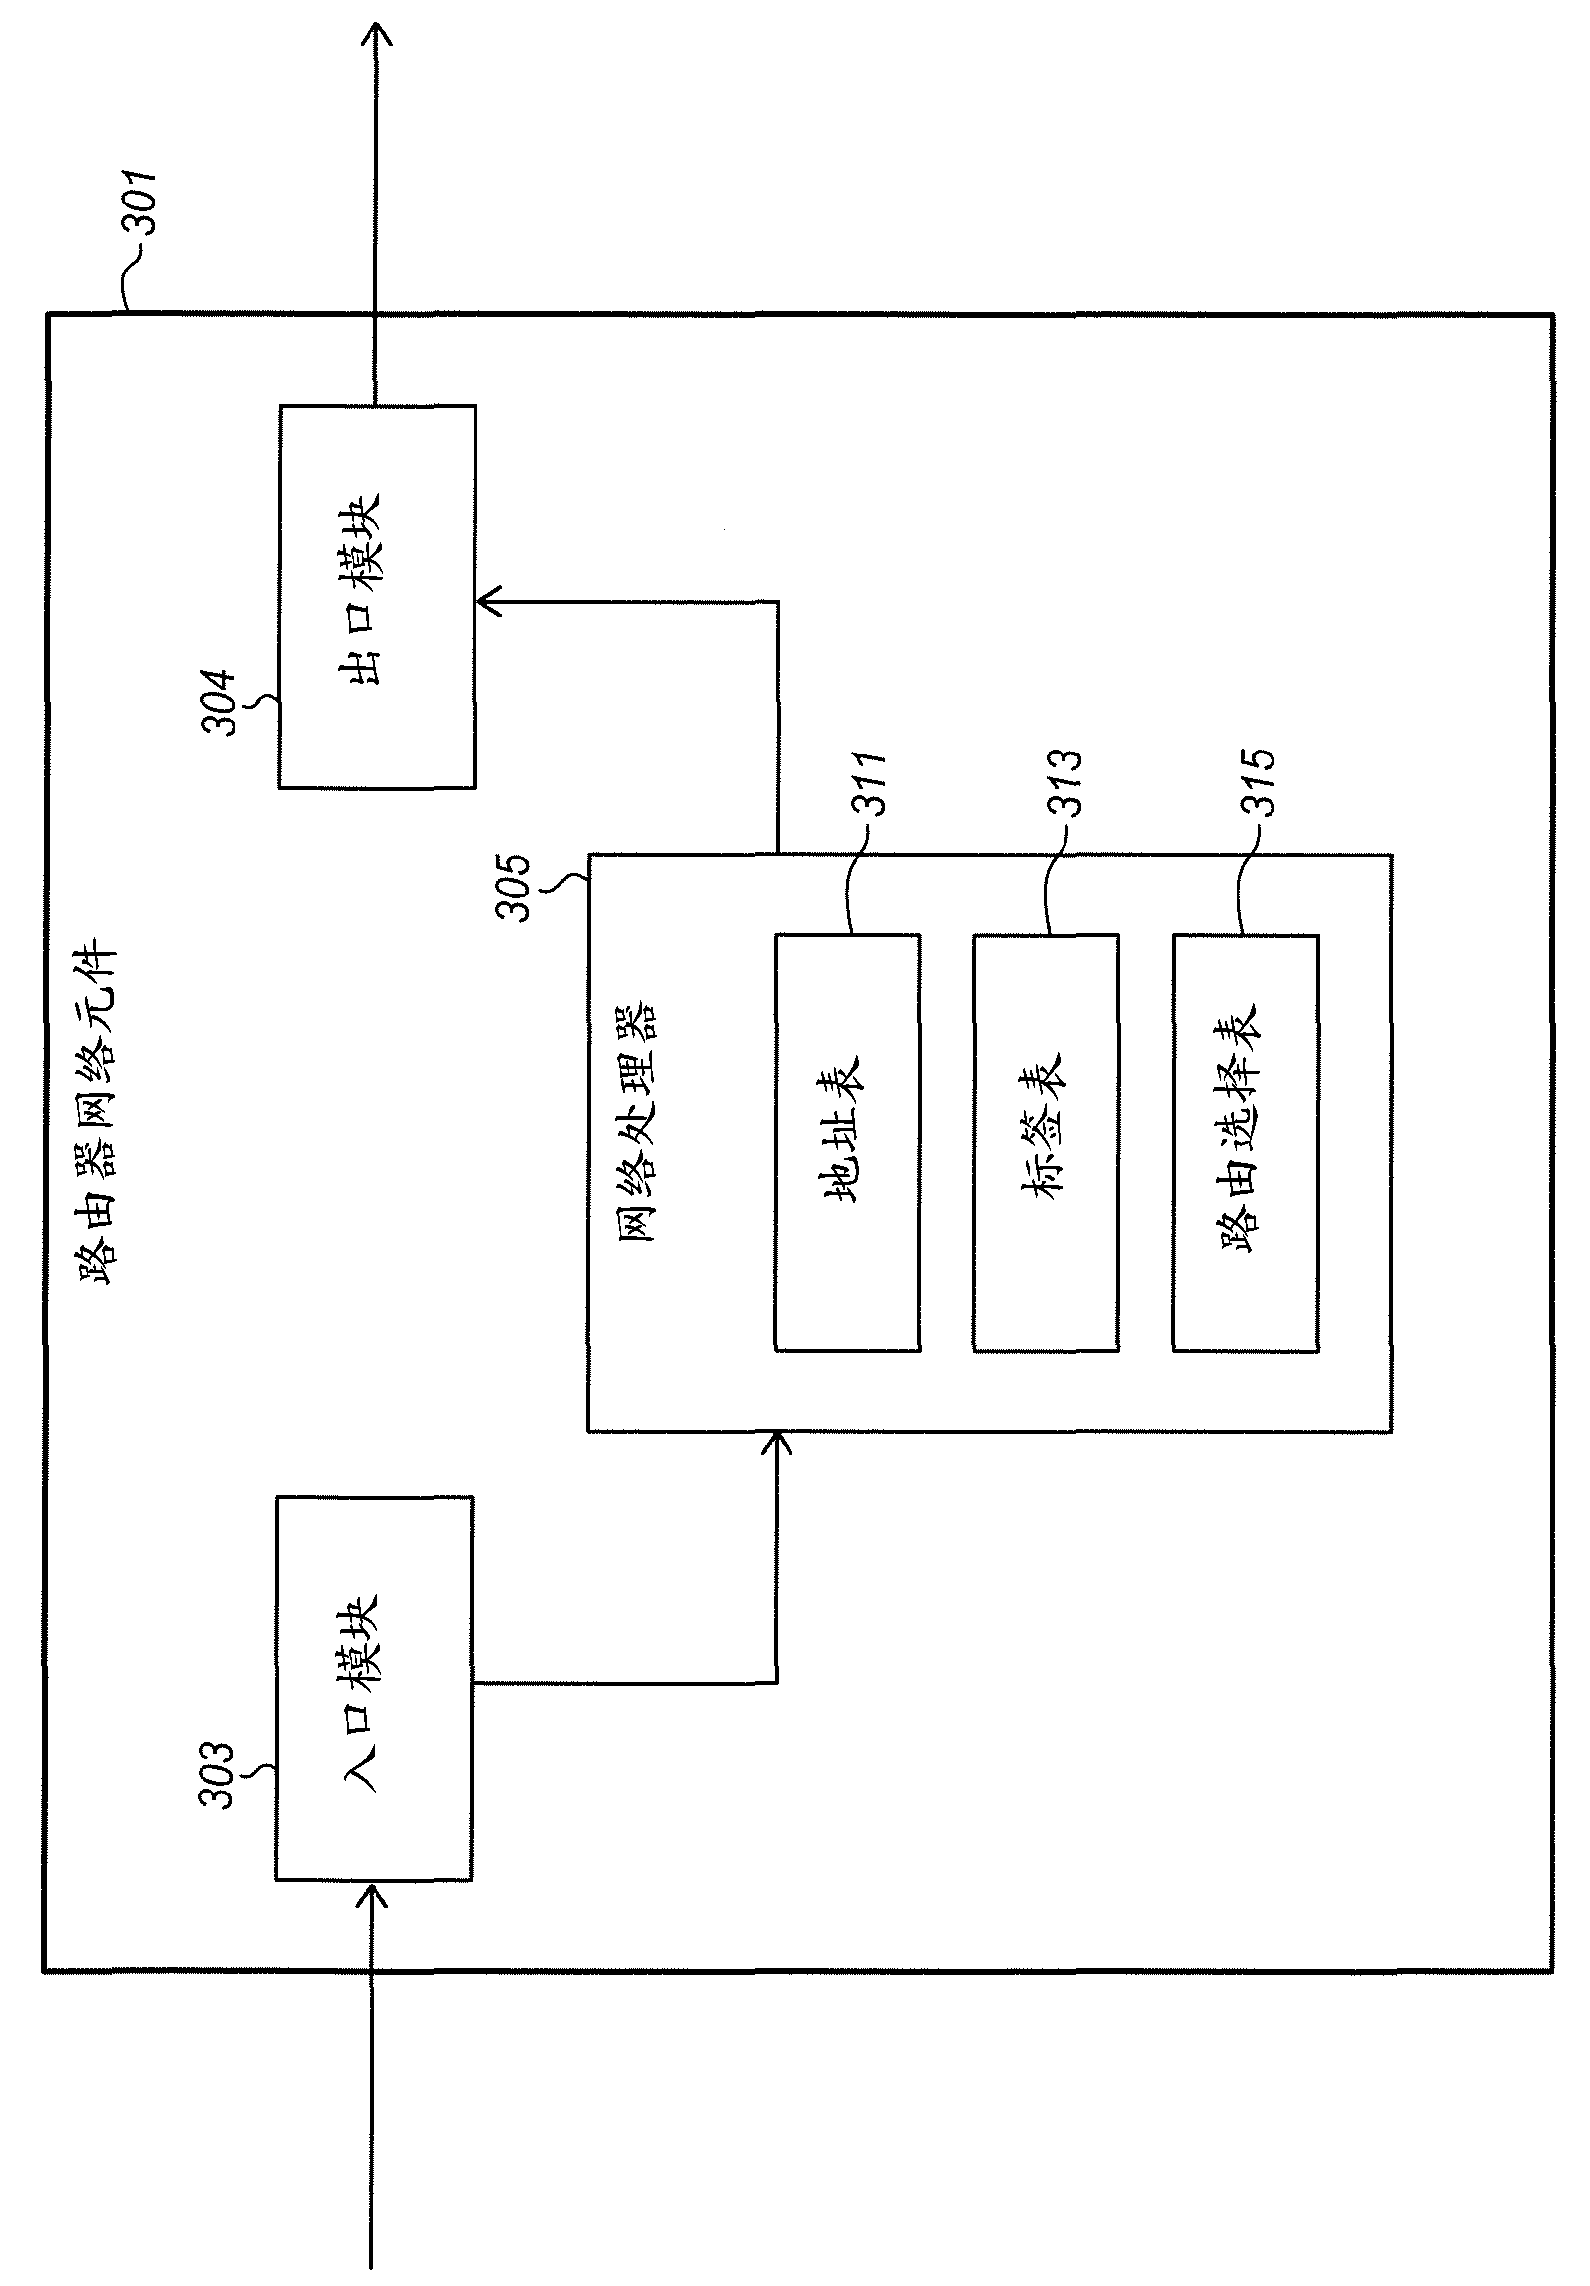 Label switched routing to connect low power network domains